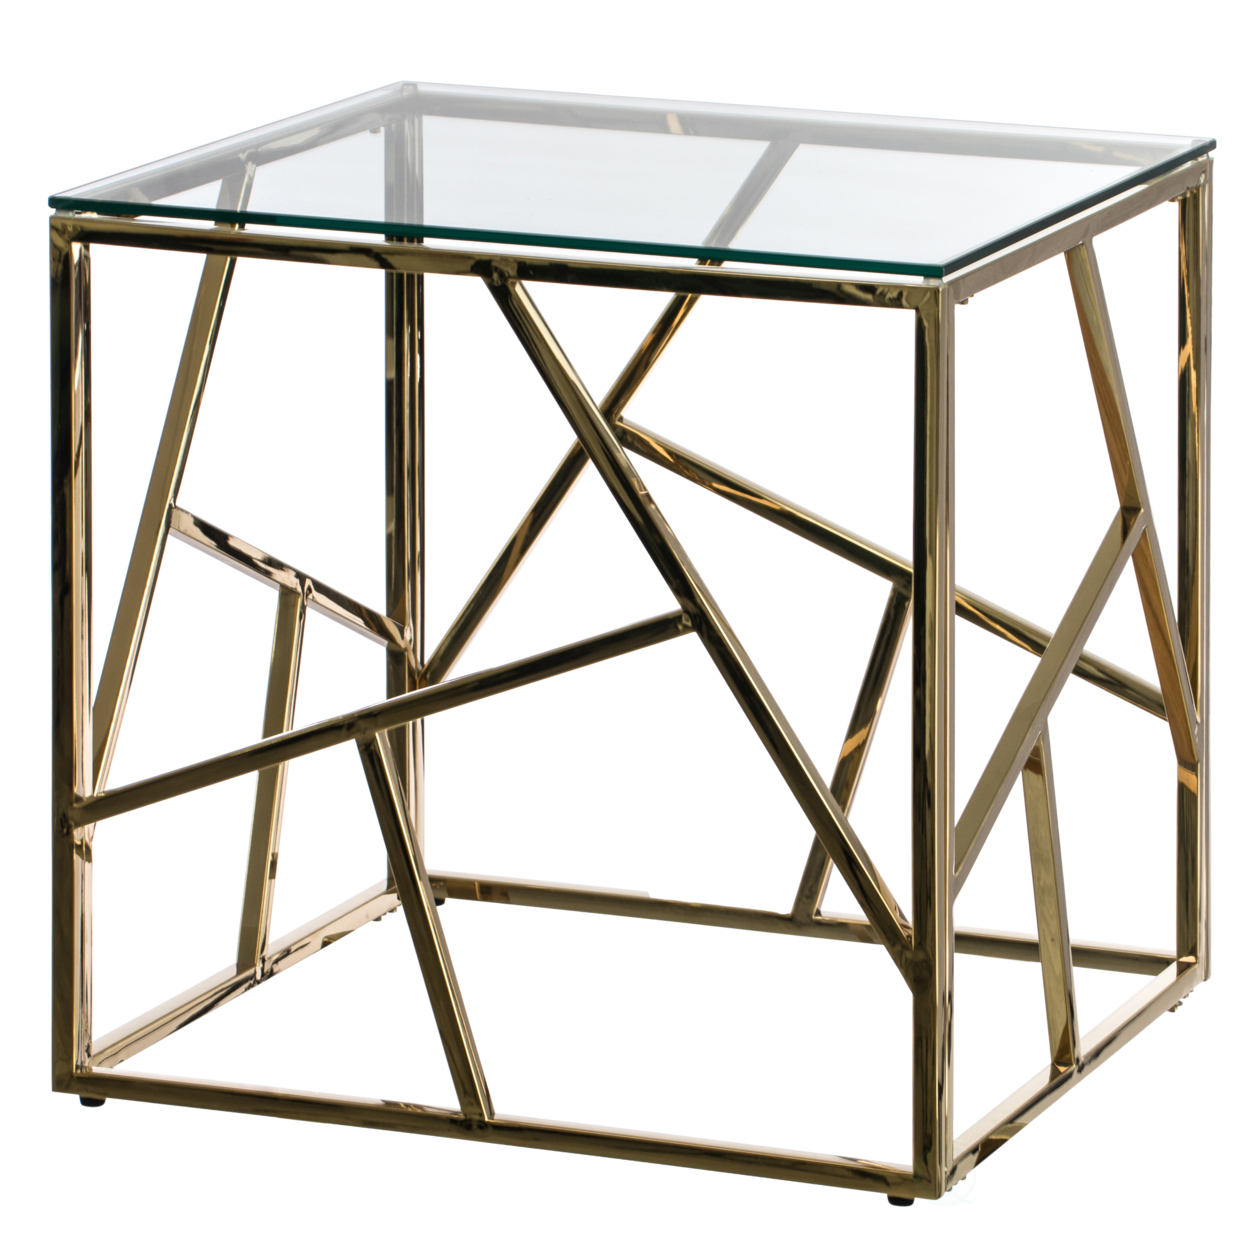 Modern Square End Side Table, Tempered Glass Top Metal Coffee Table - Gold